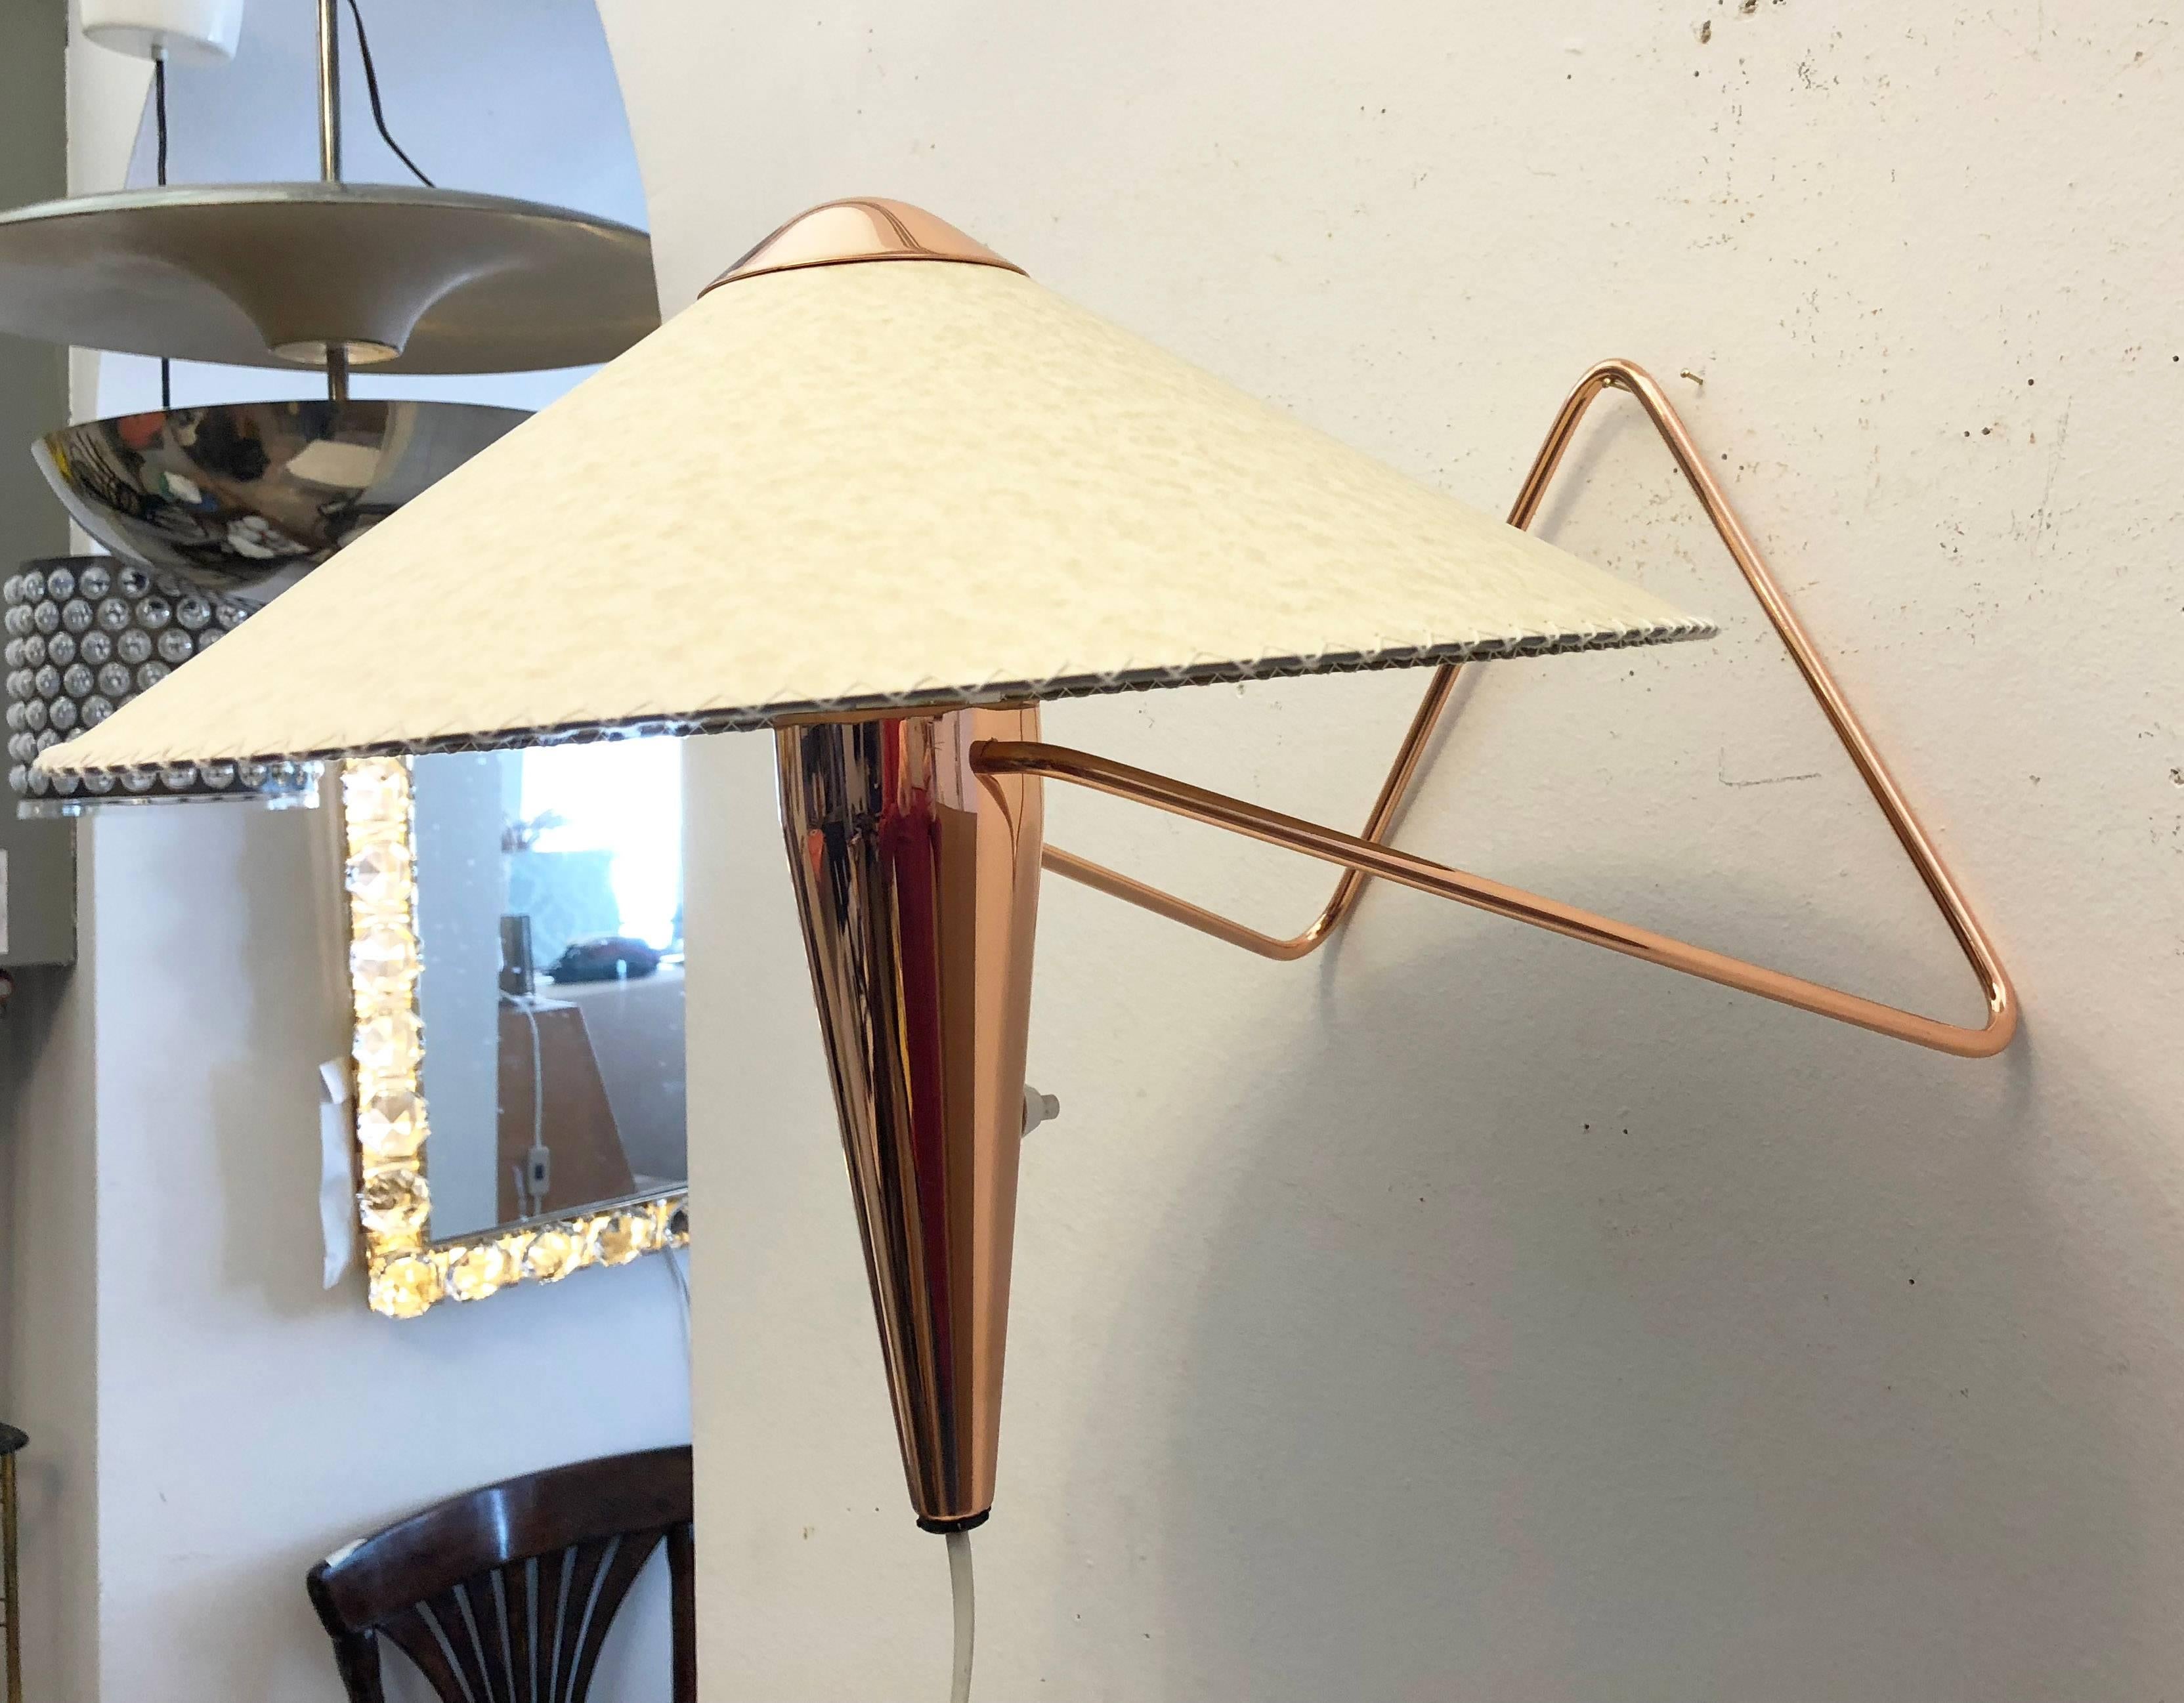 Czech Modernist Desk Lamp by Helena Frantova for Okolo In Excellent Condition For Sale In Vienna, AT